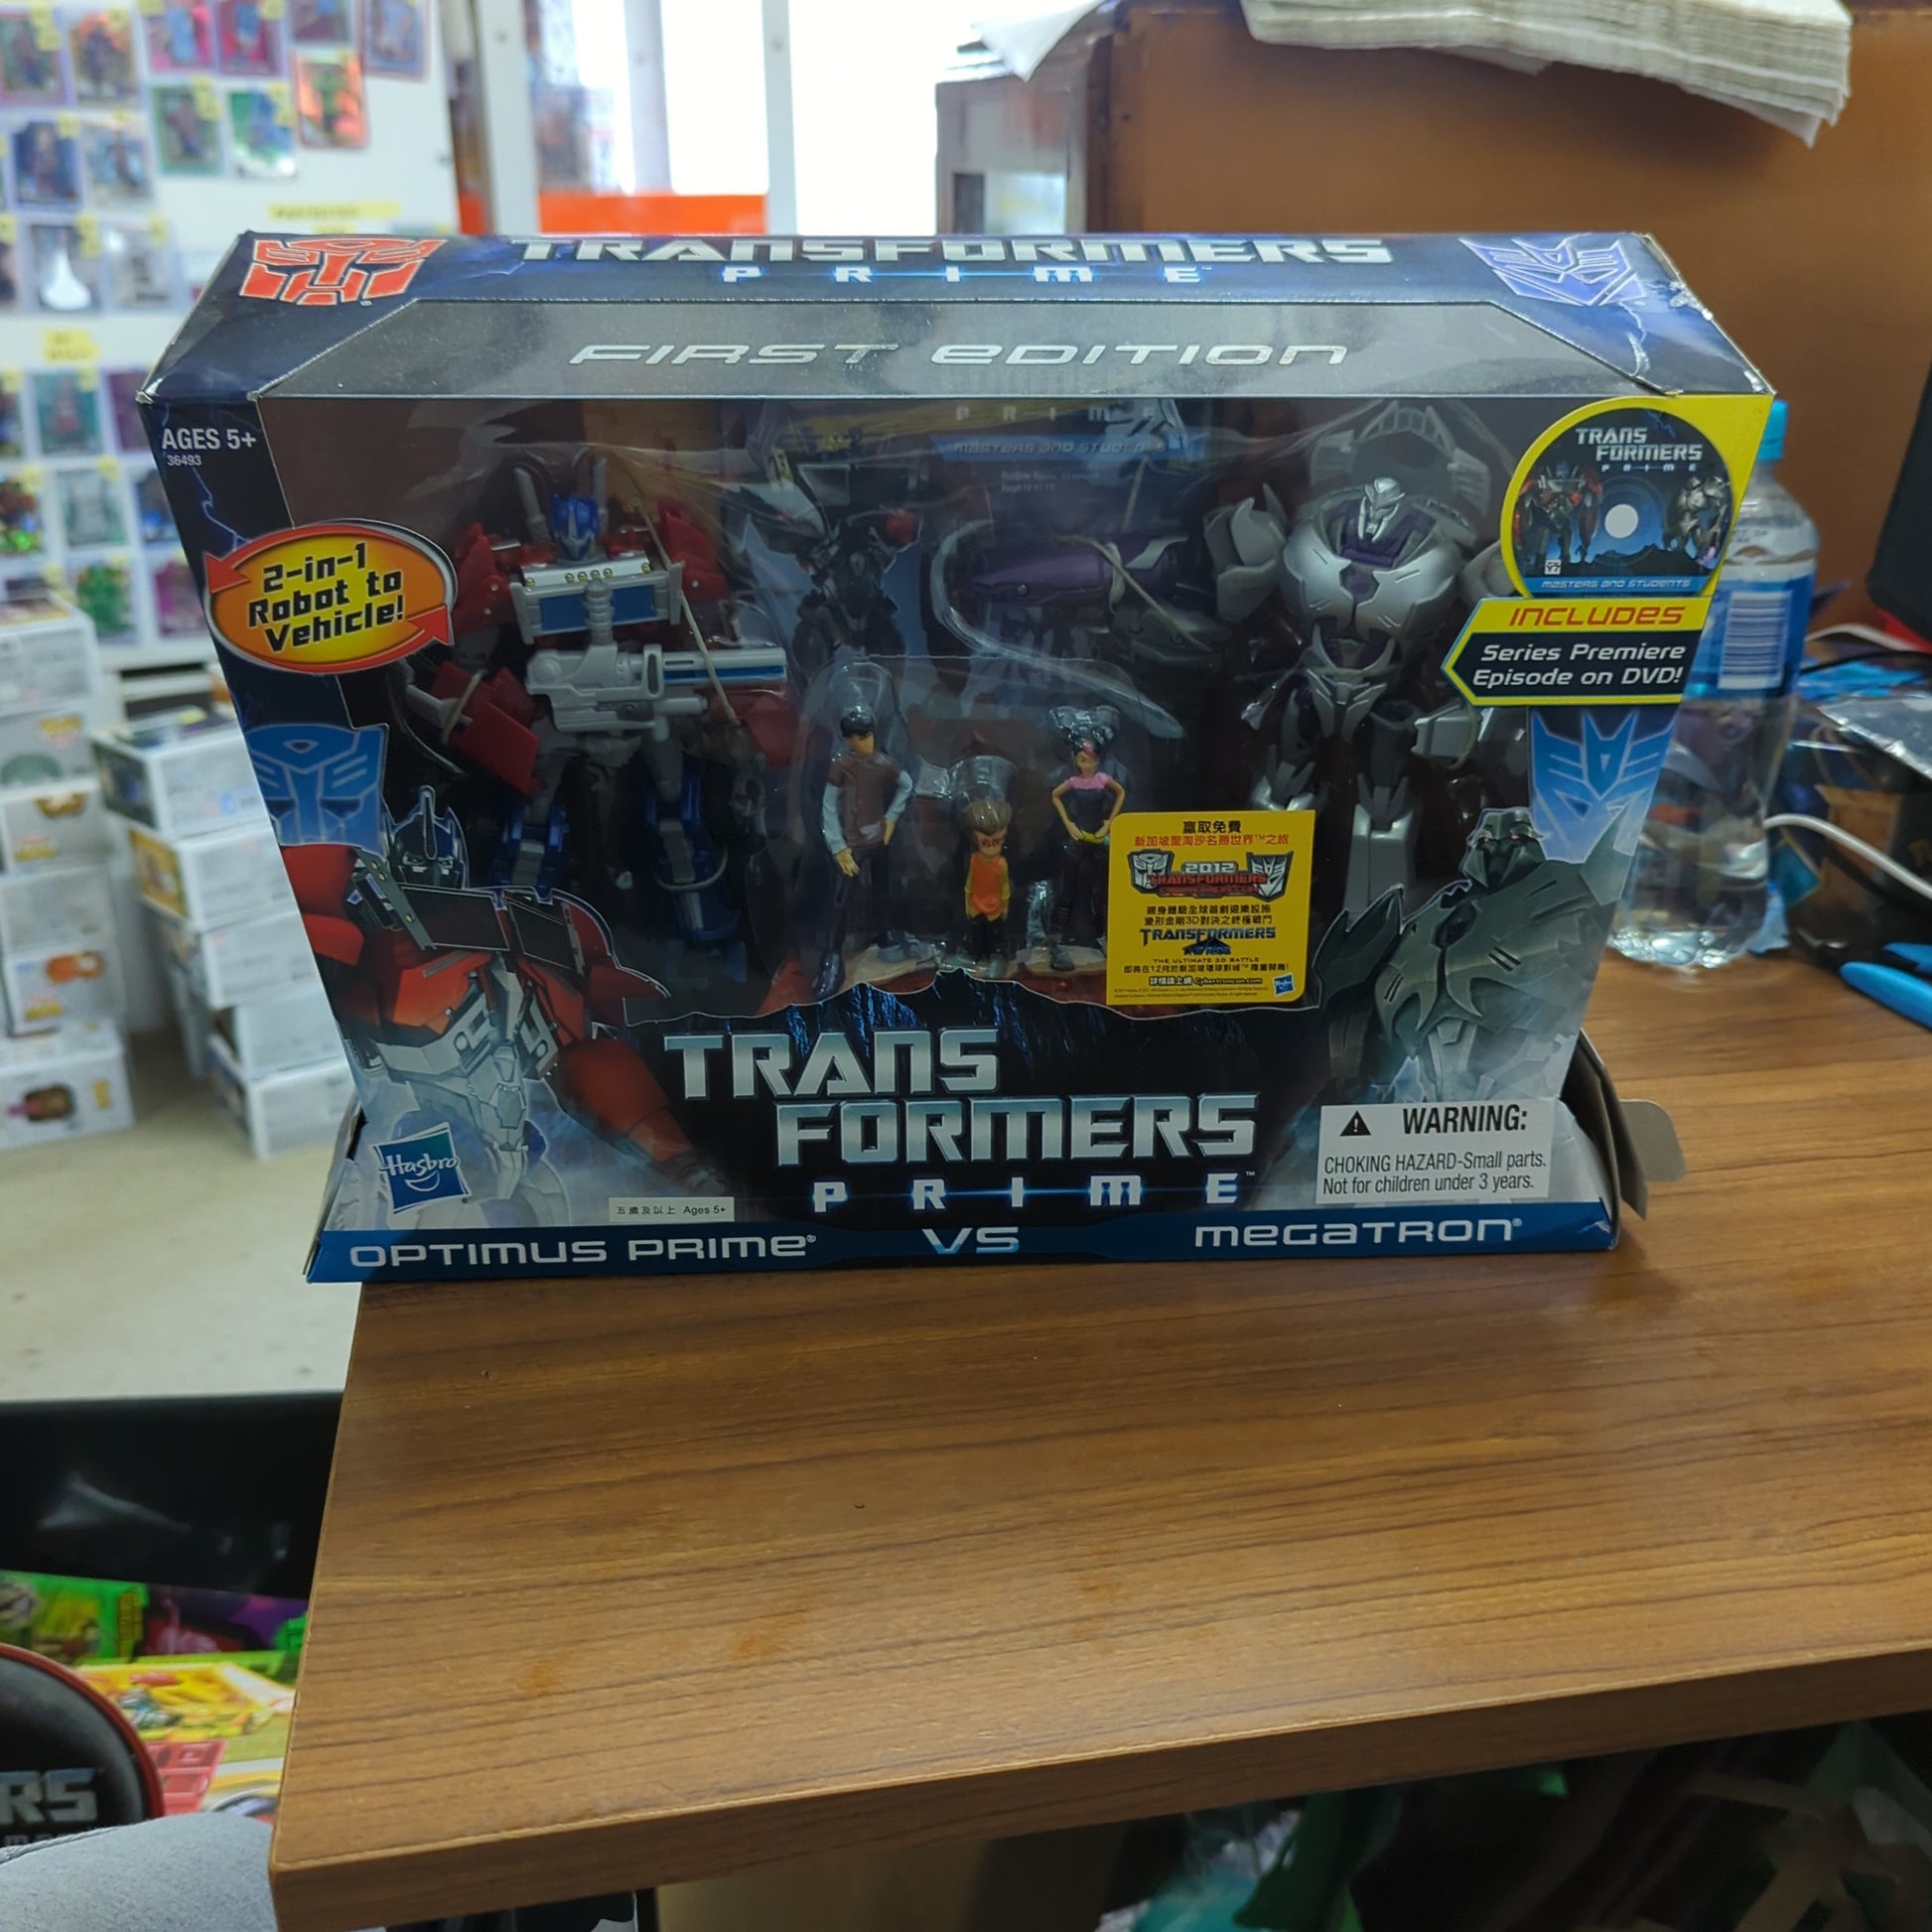 Hasbro Transformers Prime Optimus vs Megatron First Edition Figure Pack with DVD FRENLY BRICKS - Open 7 Days